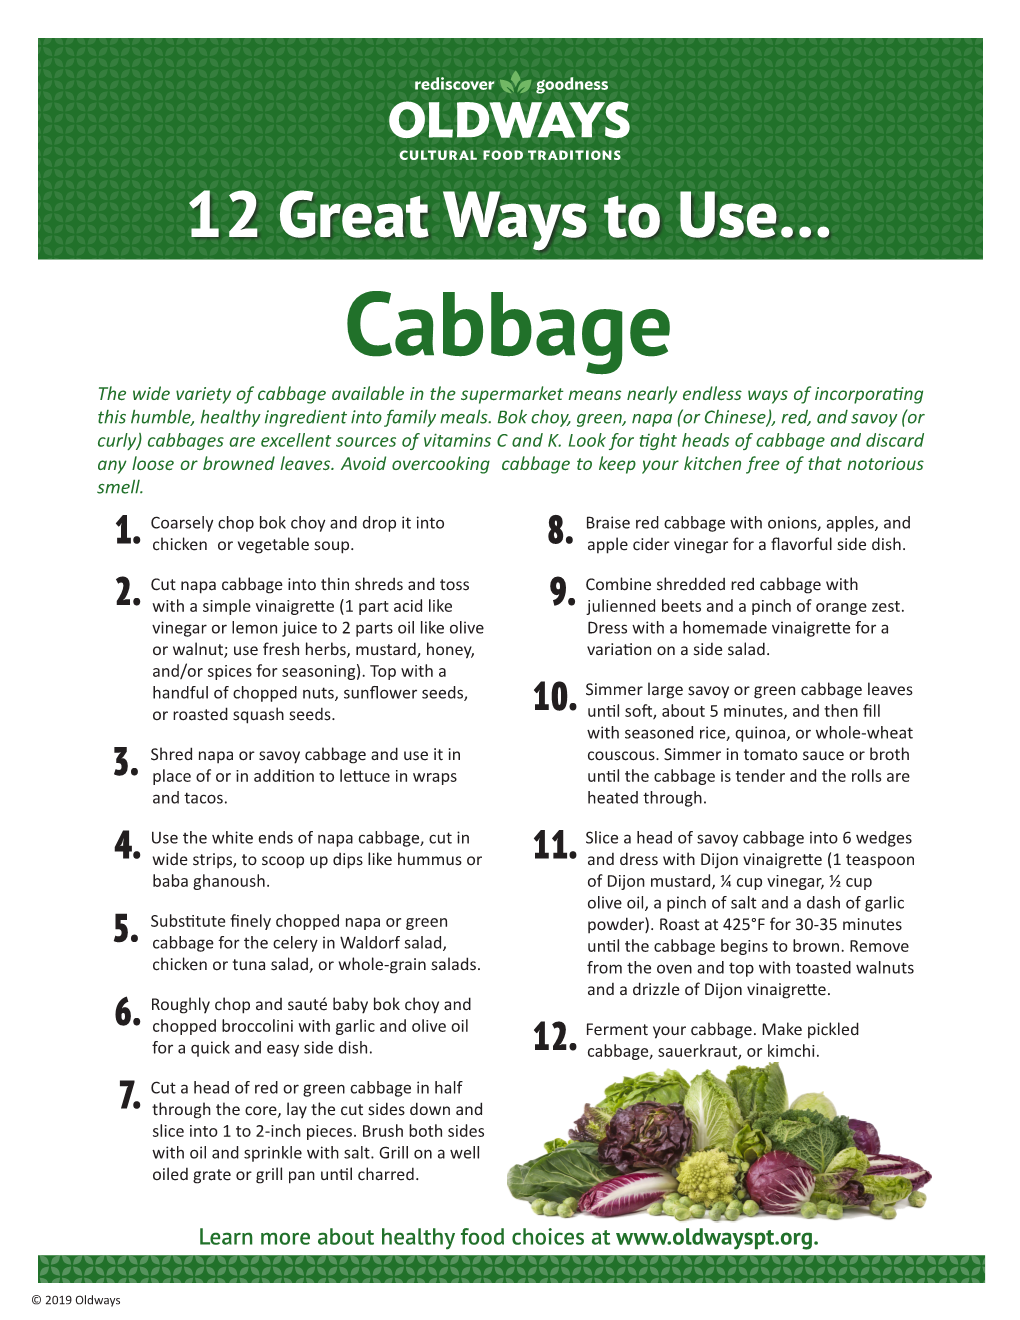 12 Great Ways to Use Cabbage